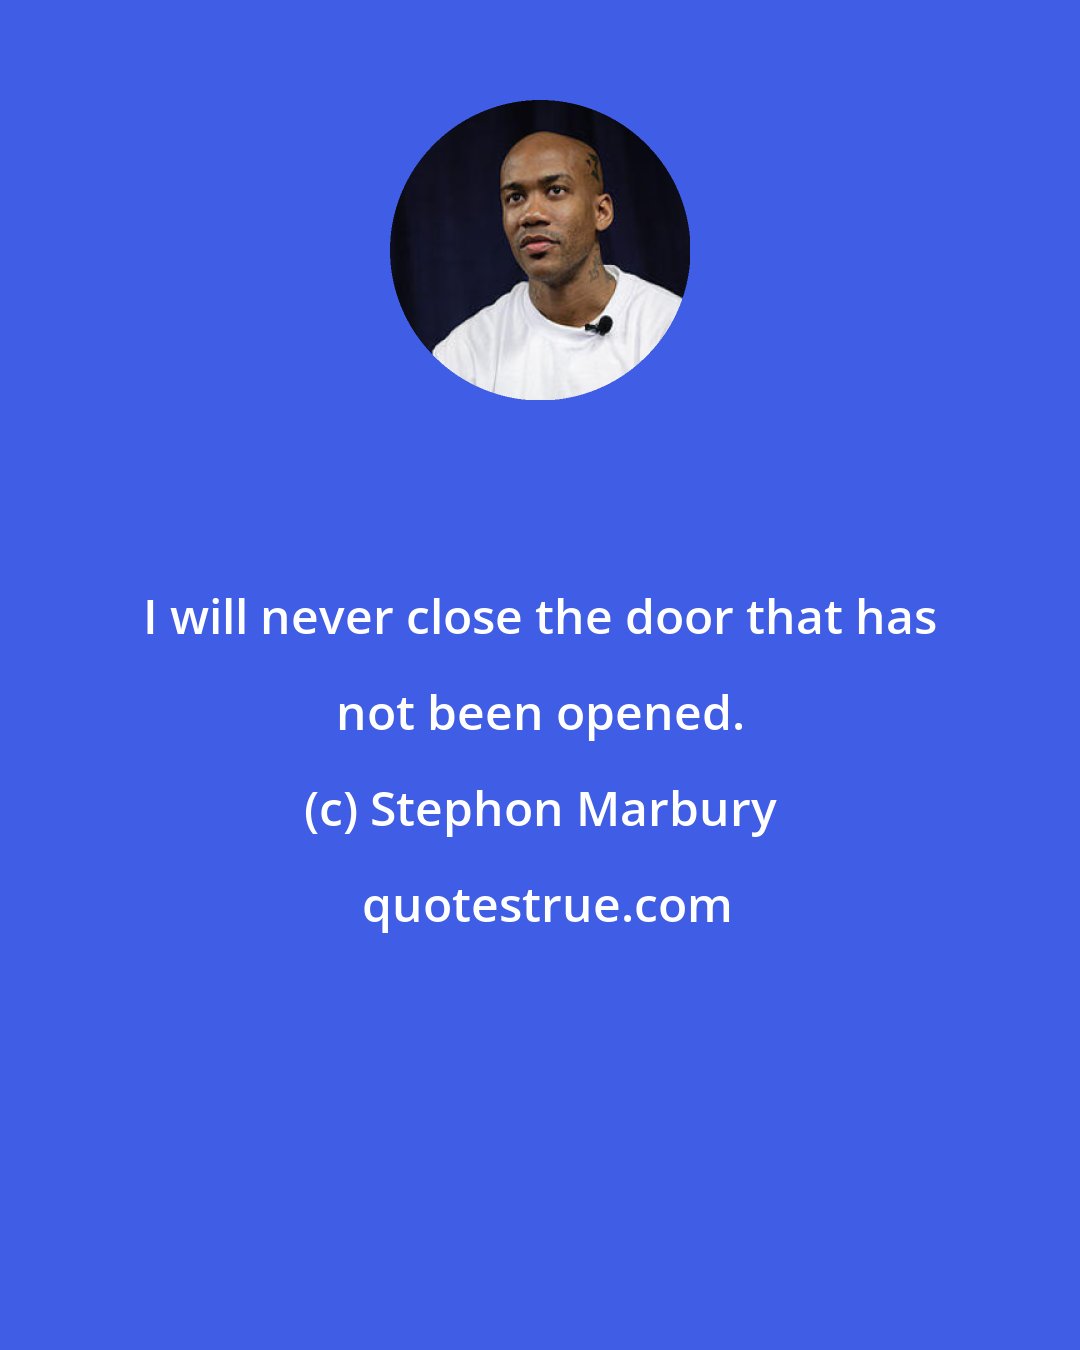 Stephon Marbury: I will never close the door that has not been opened.